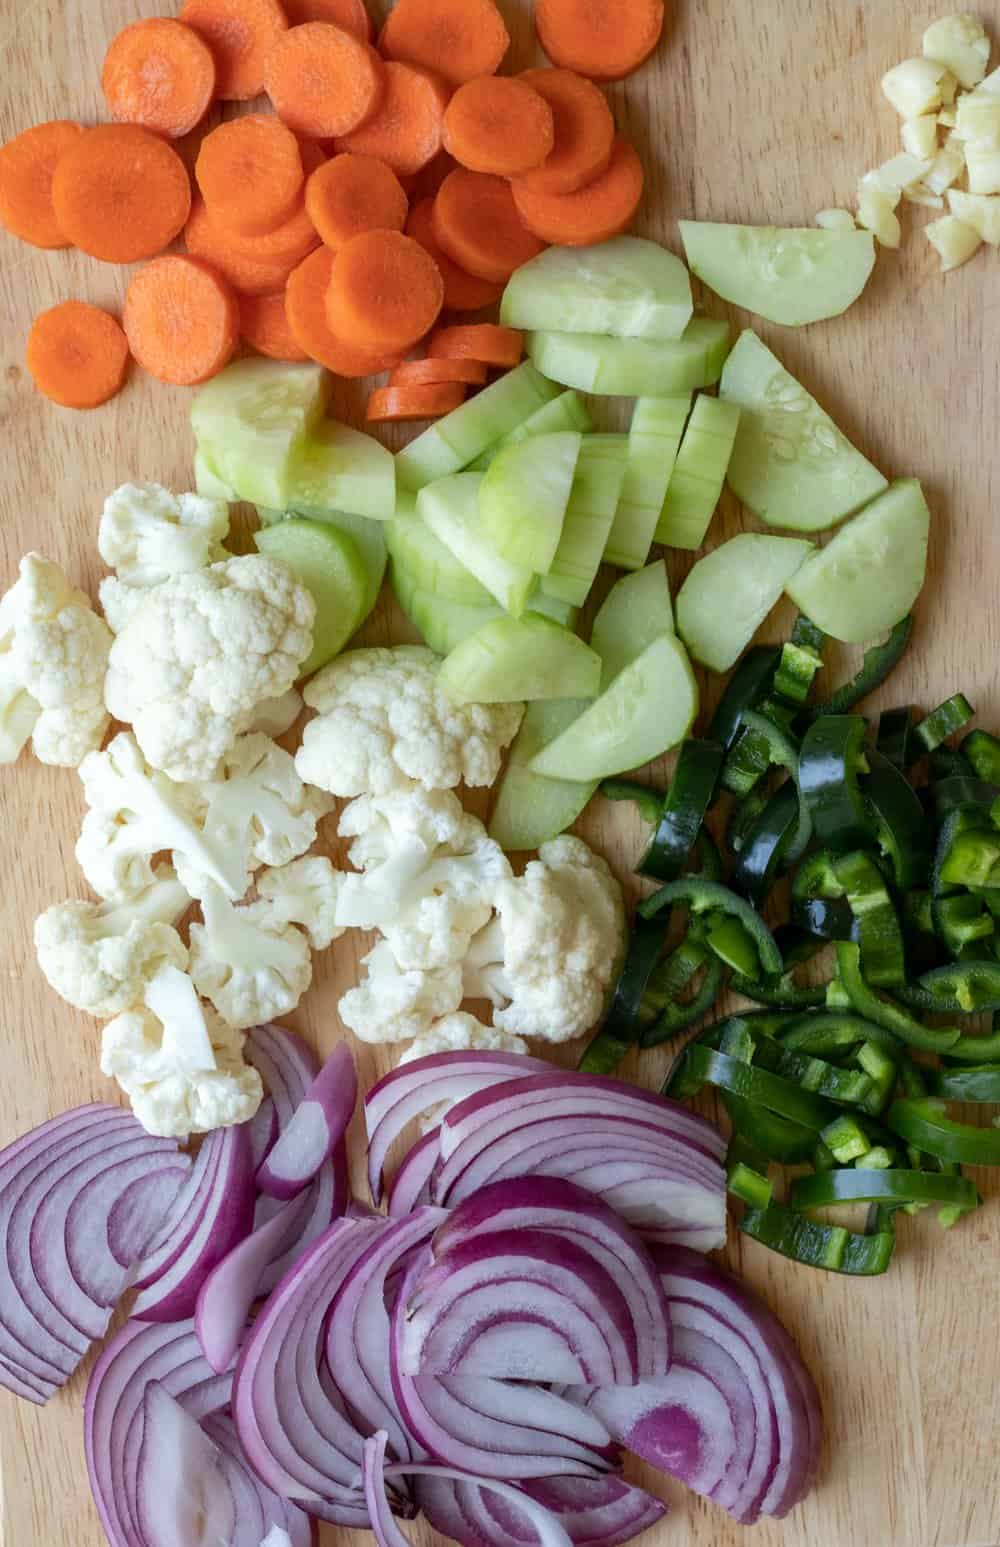 Chopping mixed vegetables for pickling, with carrot, cauliflower, cucumber, jalapeno and red onion on a cutting board.